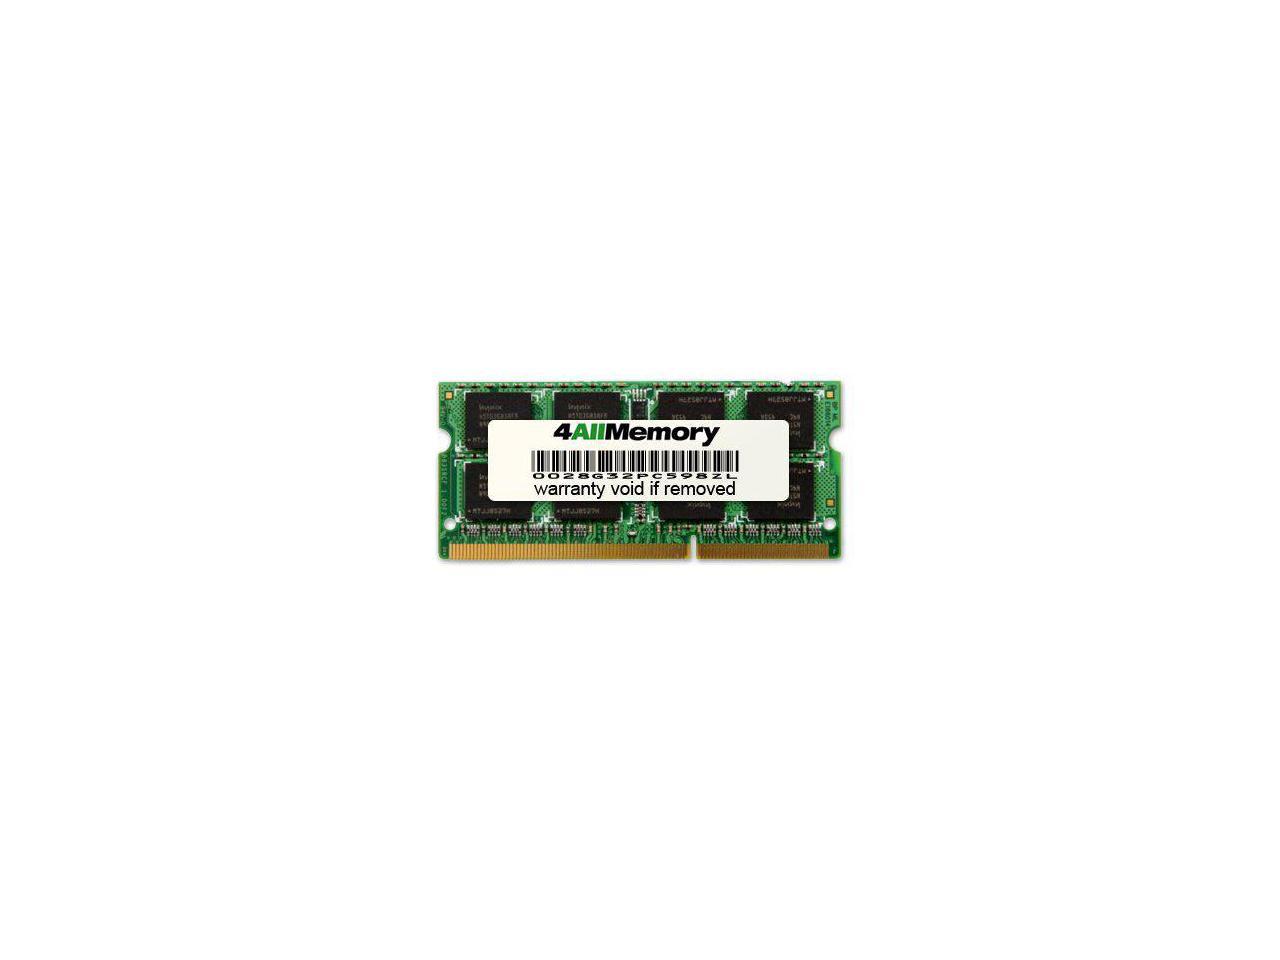 2GB DDR3-1066 PC3-8500 RAM Memory Upgrade for The Acer TravelMate TimelineX TM8573T-6801